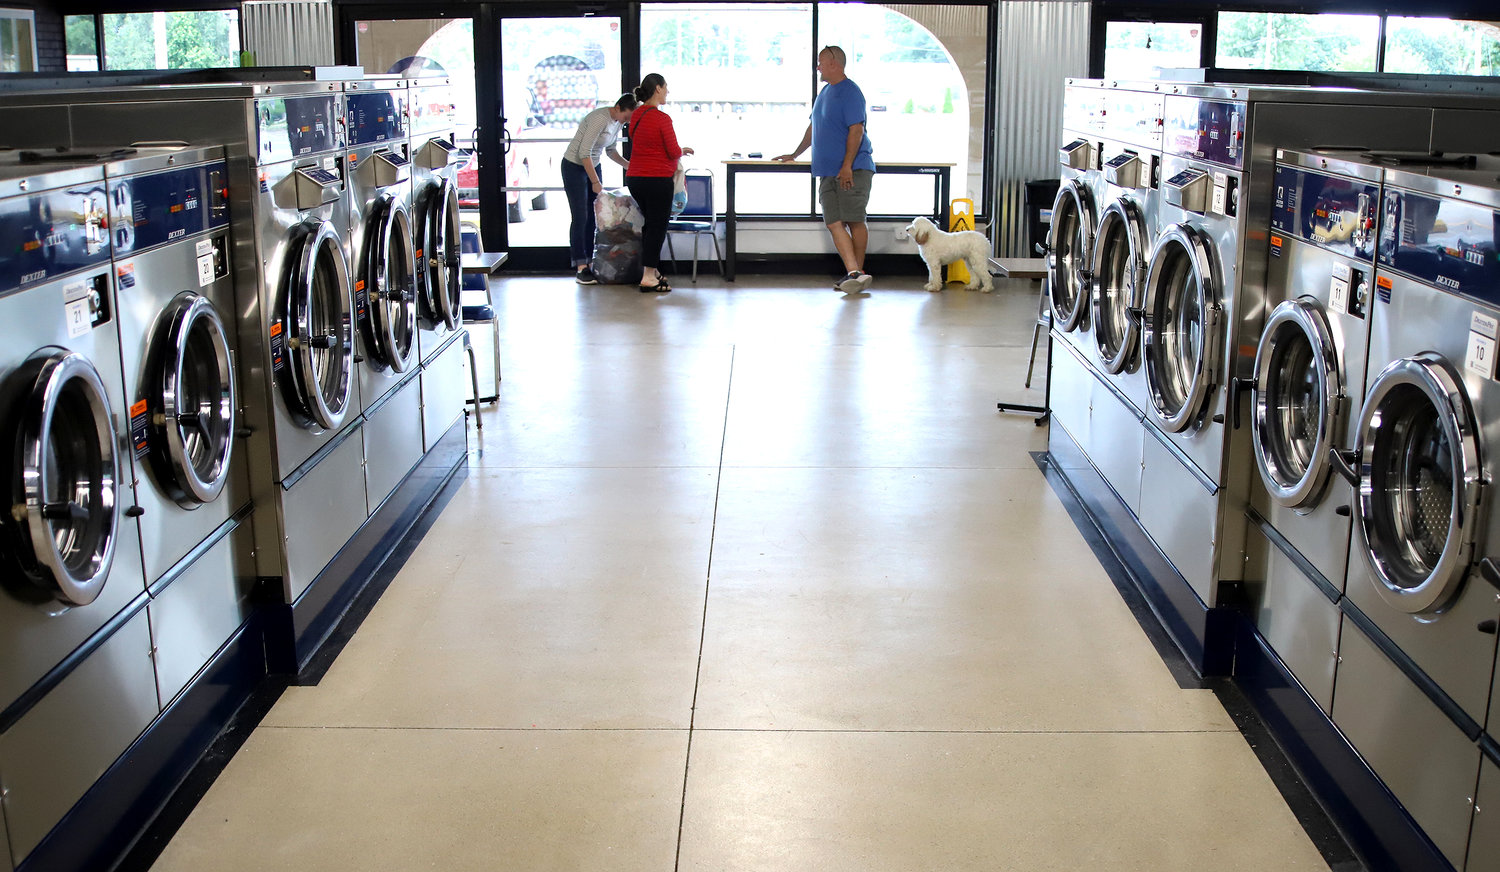 Ave. O Laundry owner Jim Cobb talks with some customers Tuesday about upcoming services at the new facility in The Plaza at Fort Madison.